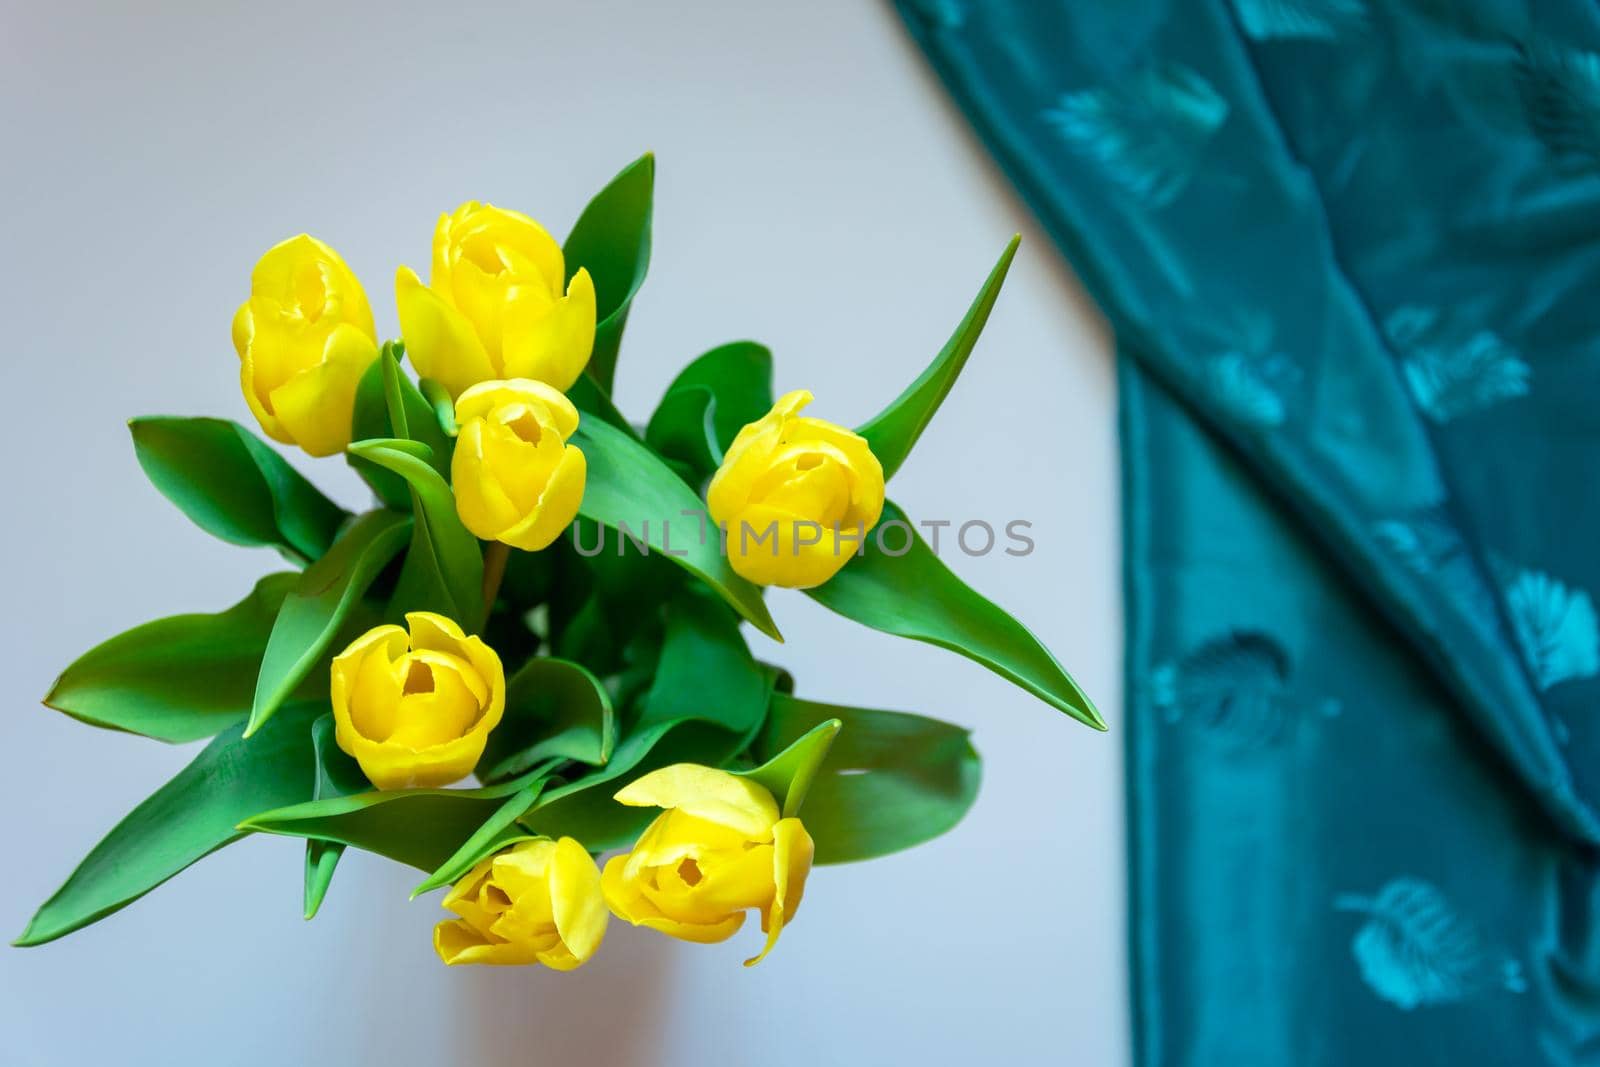 A bouquet of yellow tulips seen from above and a piece of fabric